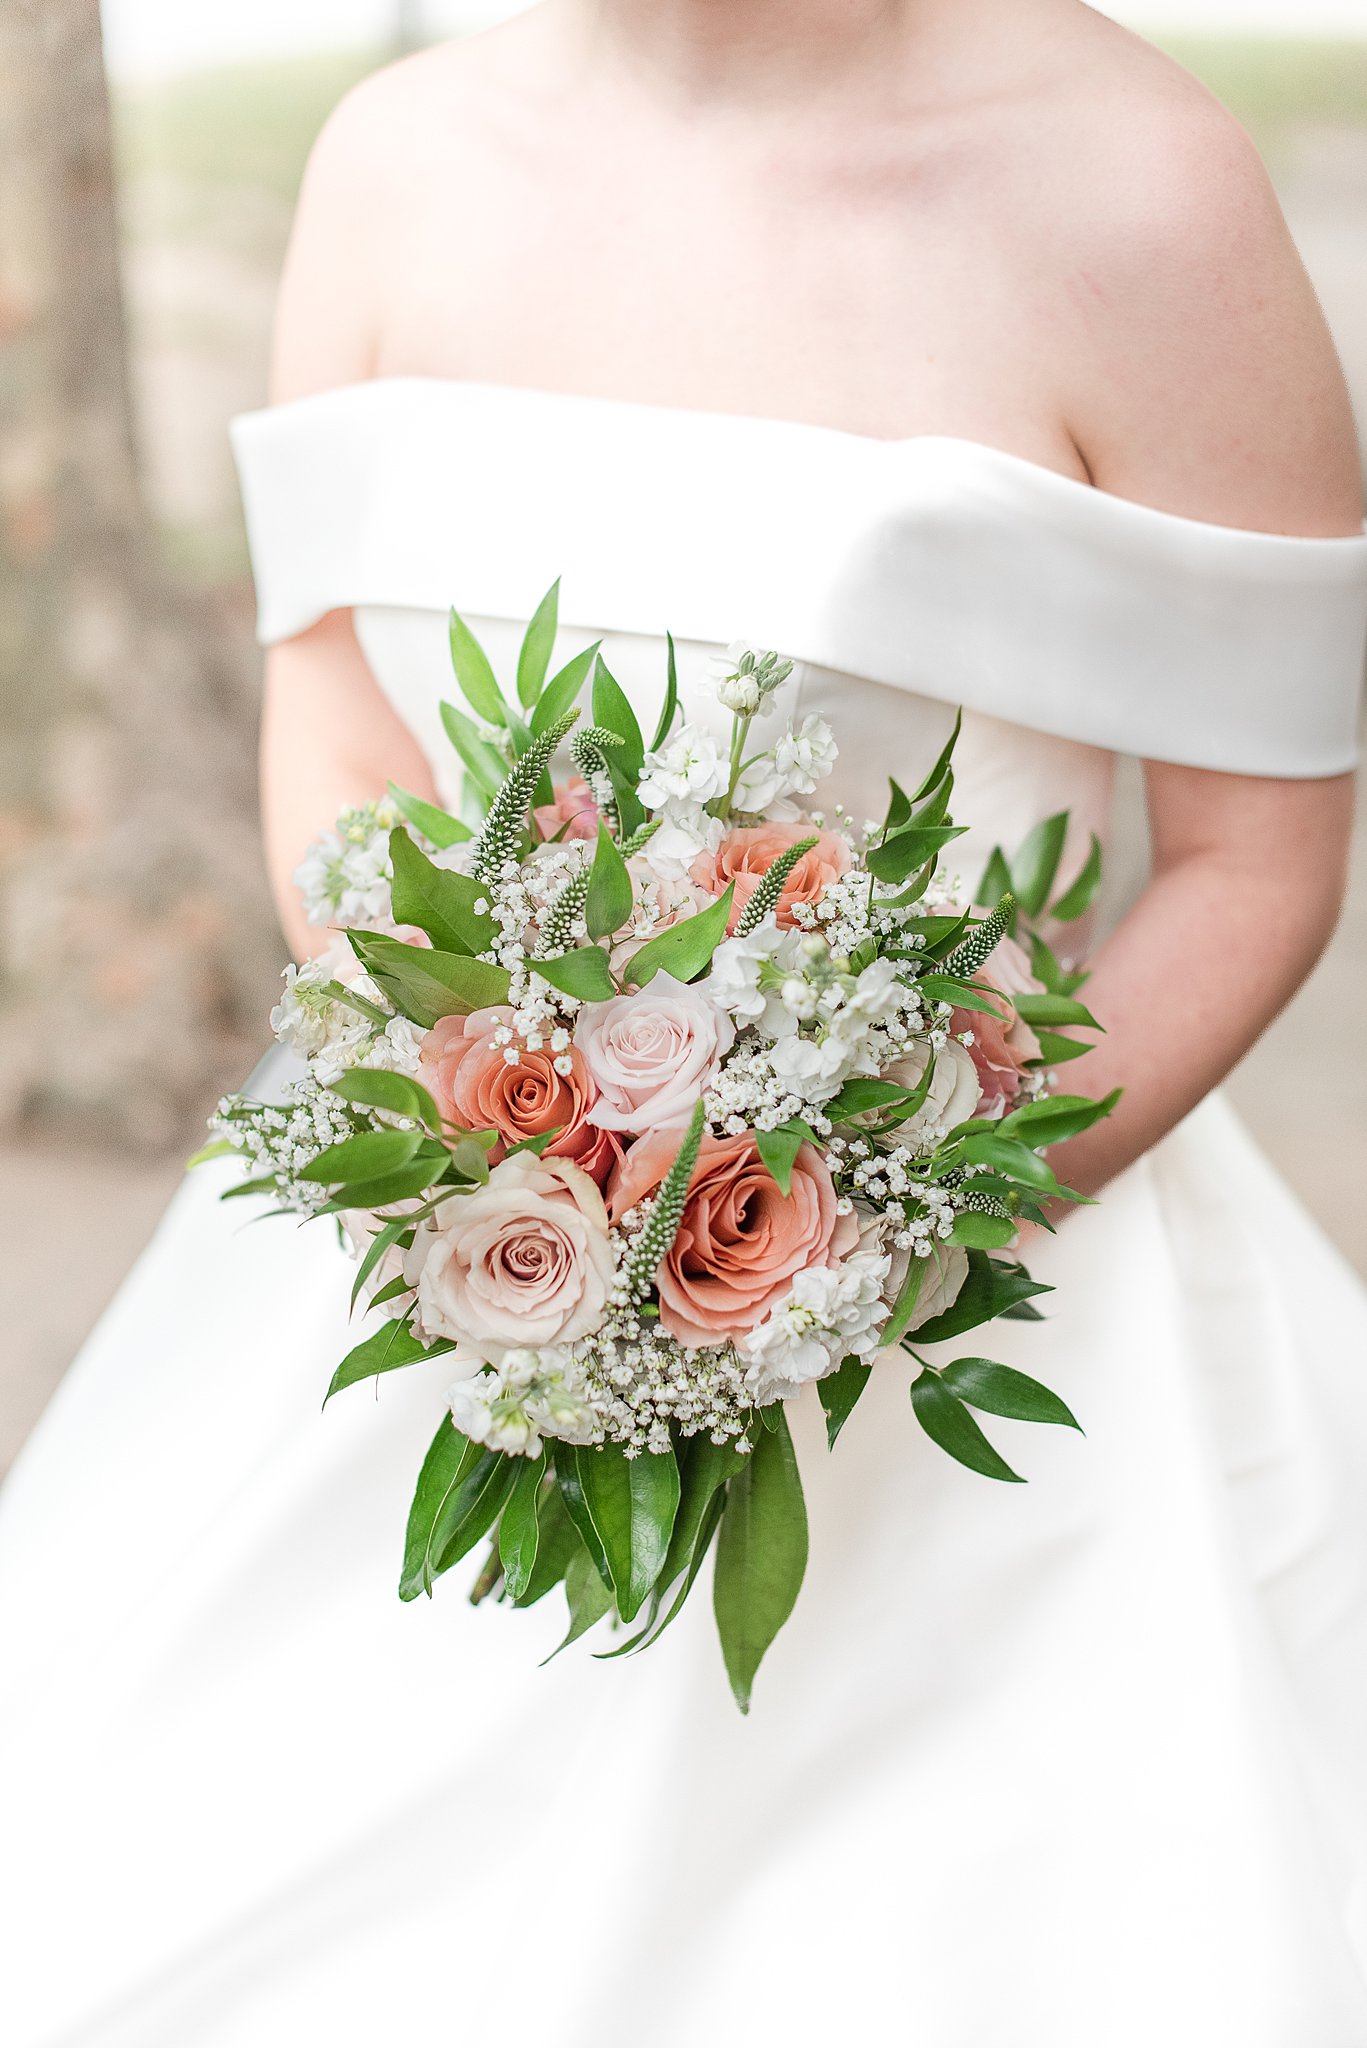 Details of a bride's pink bouquet in her hands